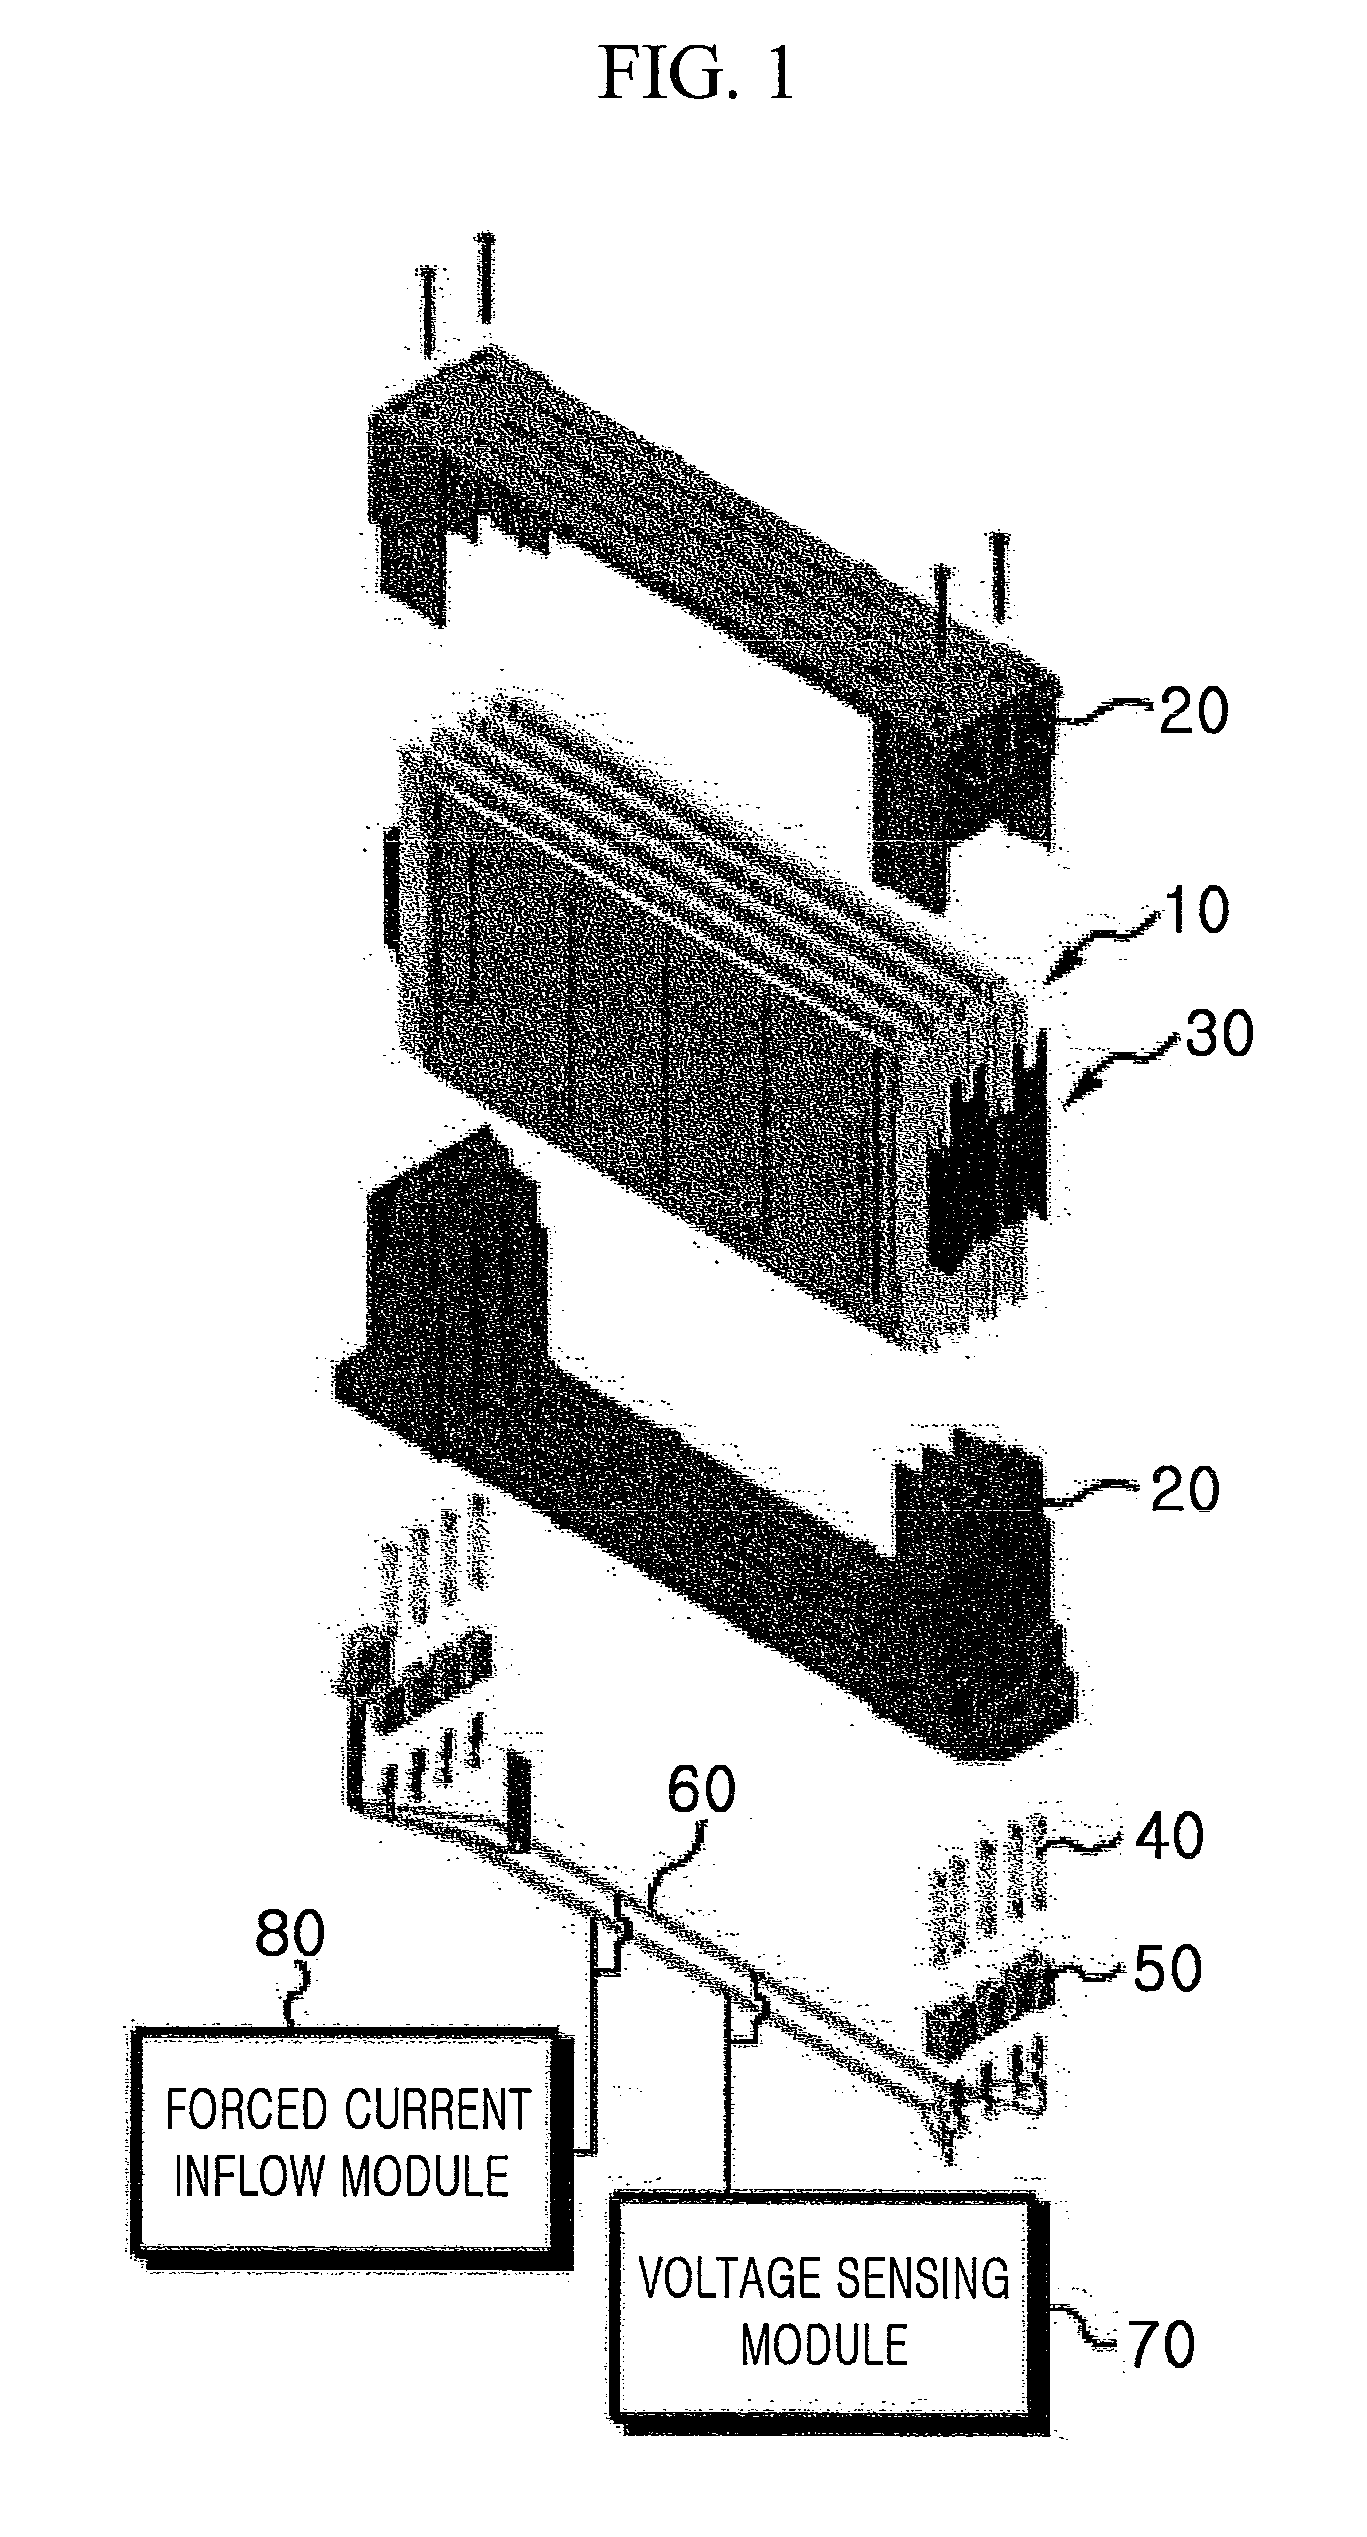 Contact pad for sensing voltage of cell module assembly and cell module assembly